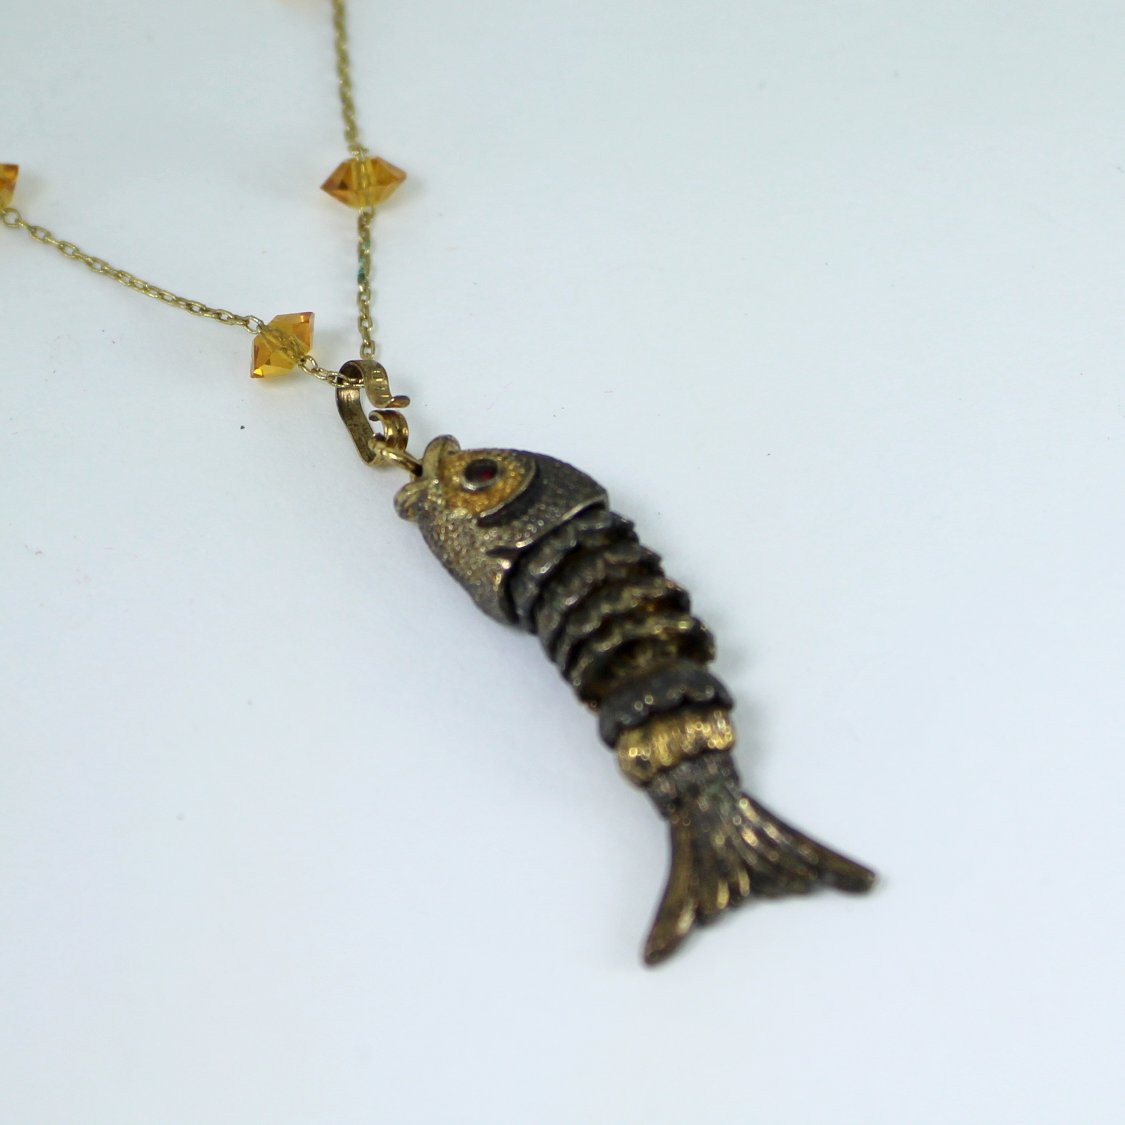 Stunning Necklace Monet Articulated Fish Amber Crystal Chain trembler fish moves like live